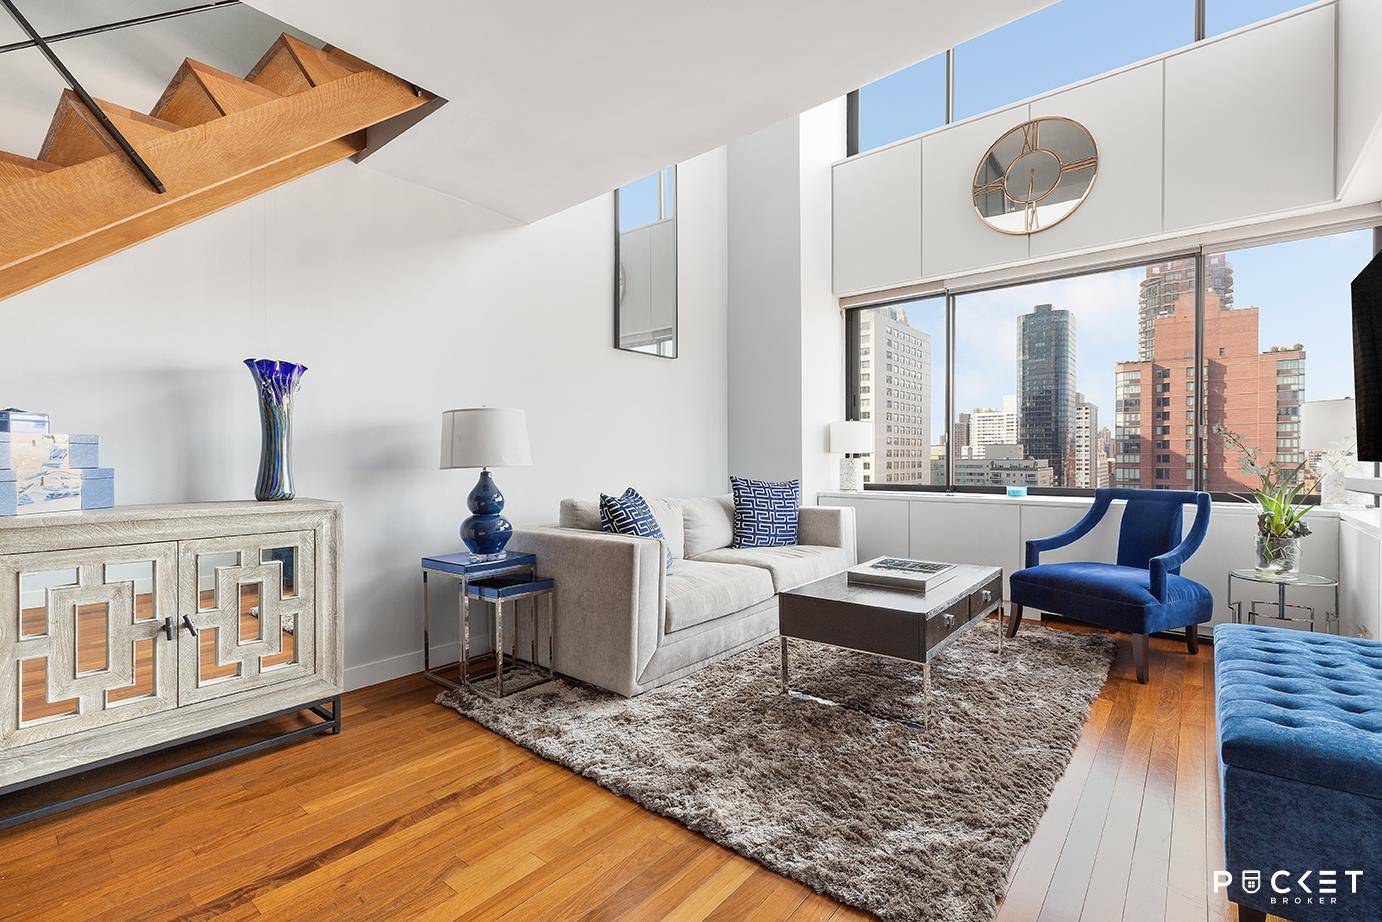 Sun drenched, north east facing, absolutely stunning duplex convertible 2, 2 bath apartment in the heart of Upper East Side.